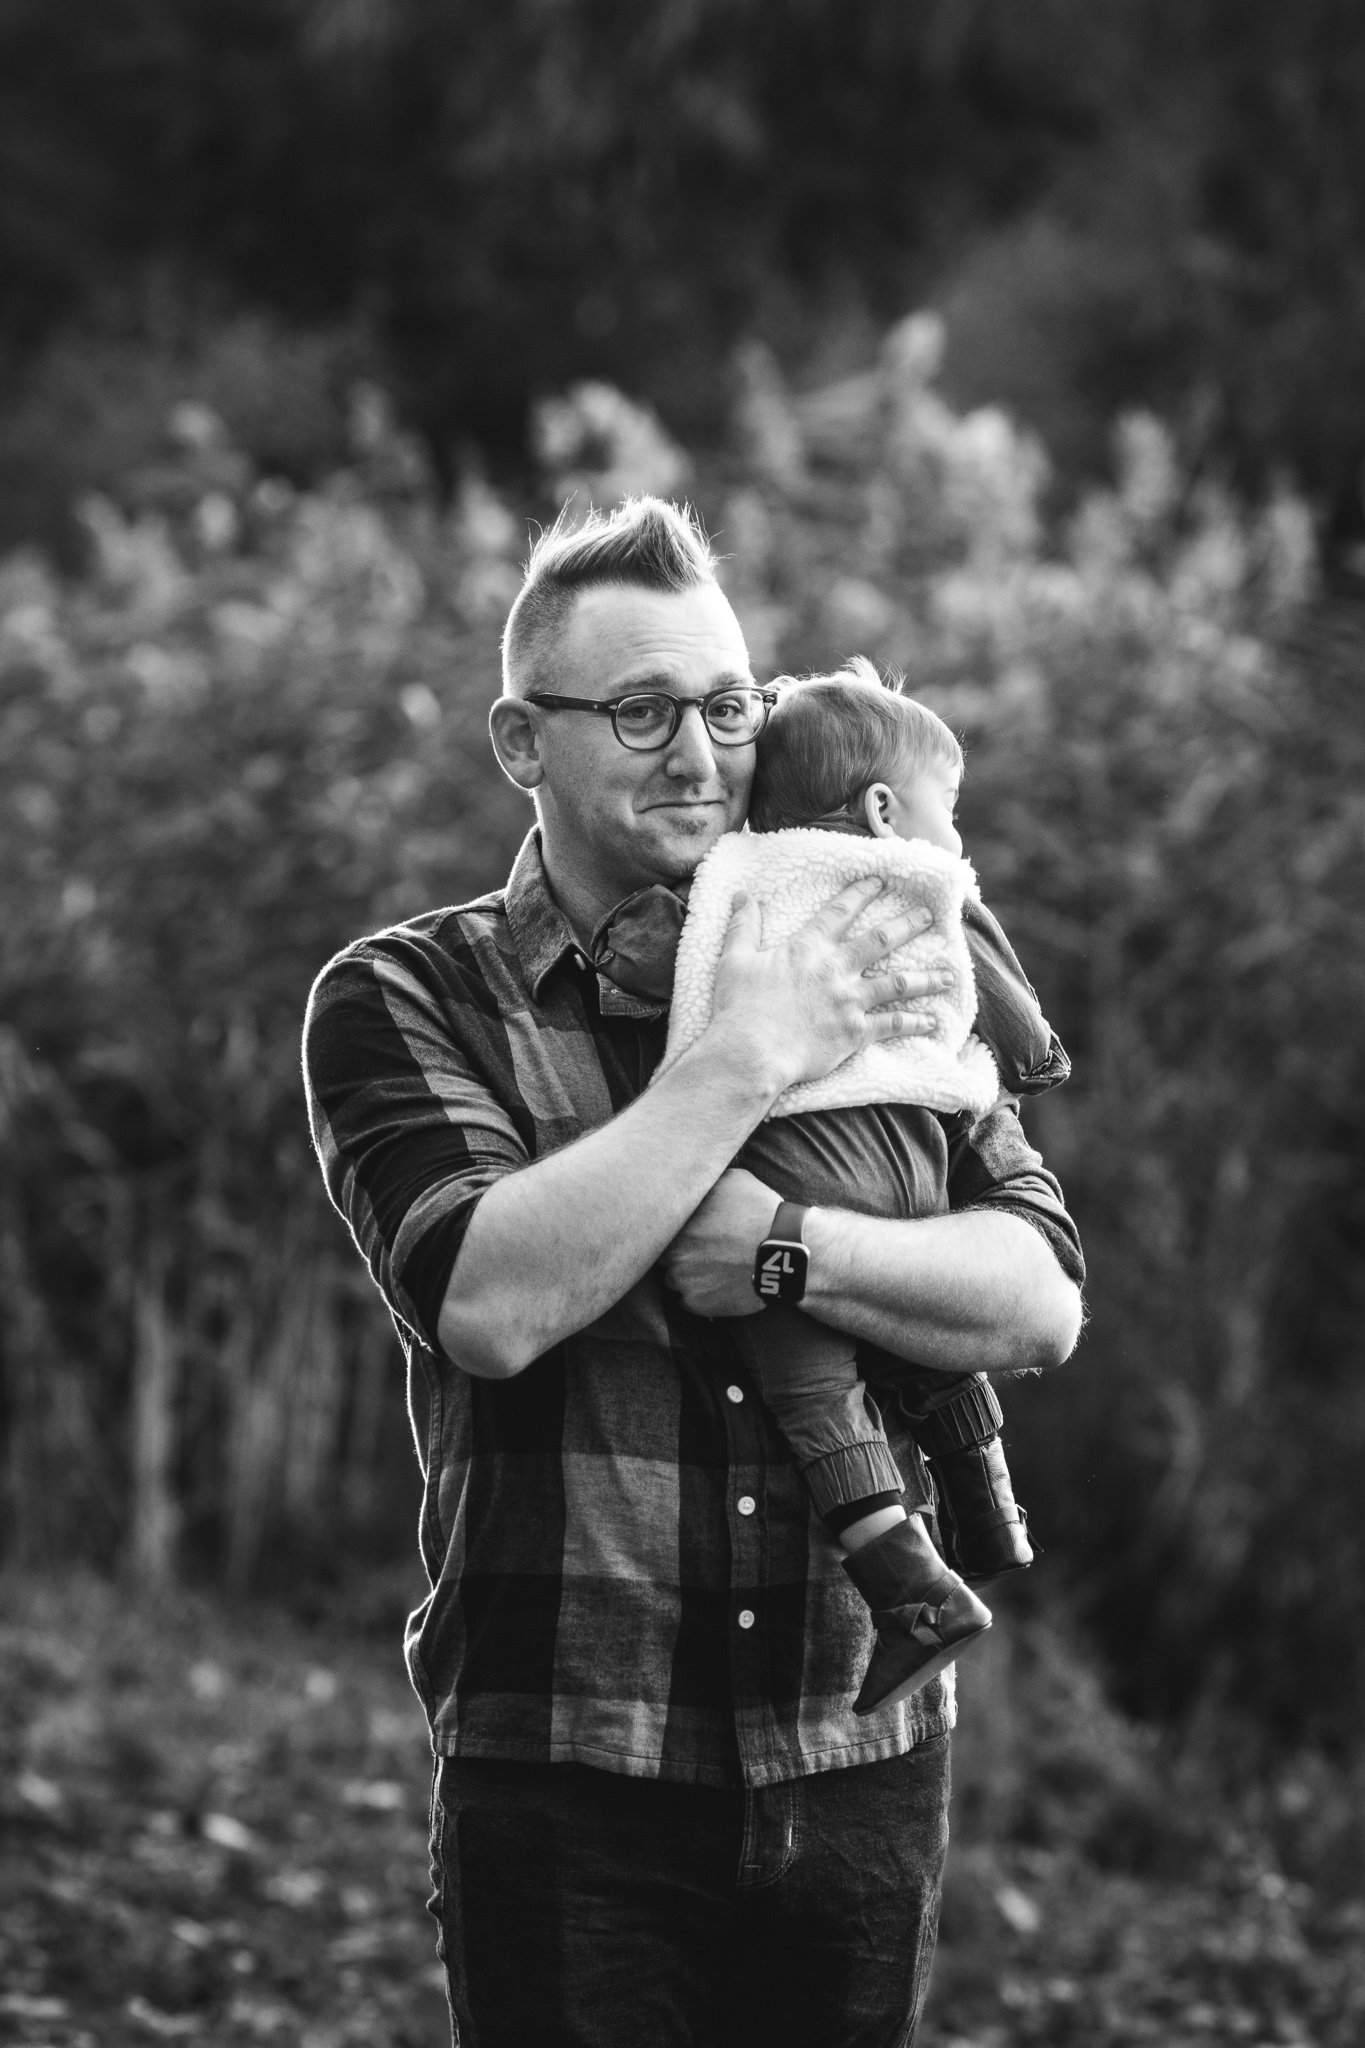  Candid portrait of a father and his little girl on a walk by Nicole Hawkins Photography. nJ family photographers professional #NicoleHawkinsPhotography #NicoleHawkinsFamily #fallfamilyphotos #fallphotos #familyphotographerNJ #NJfallfamilypics 